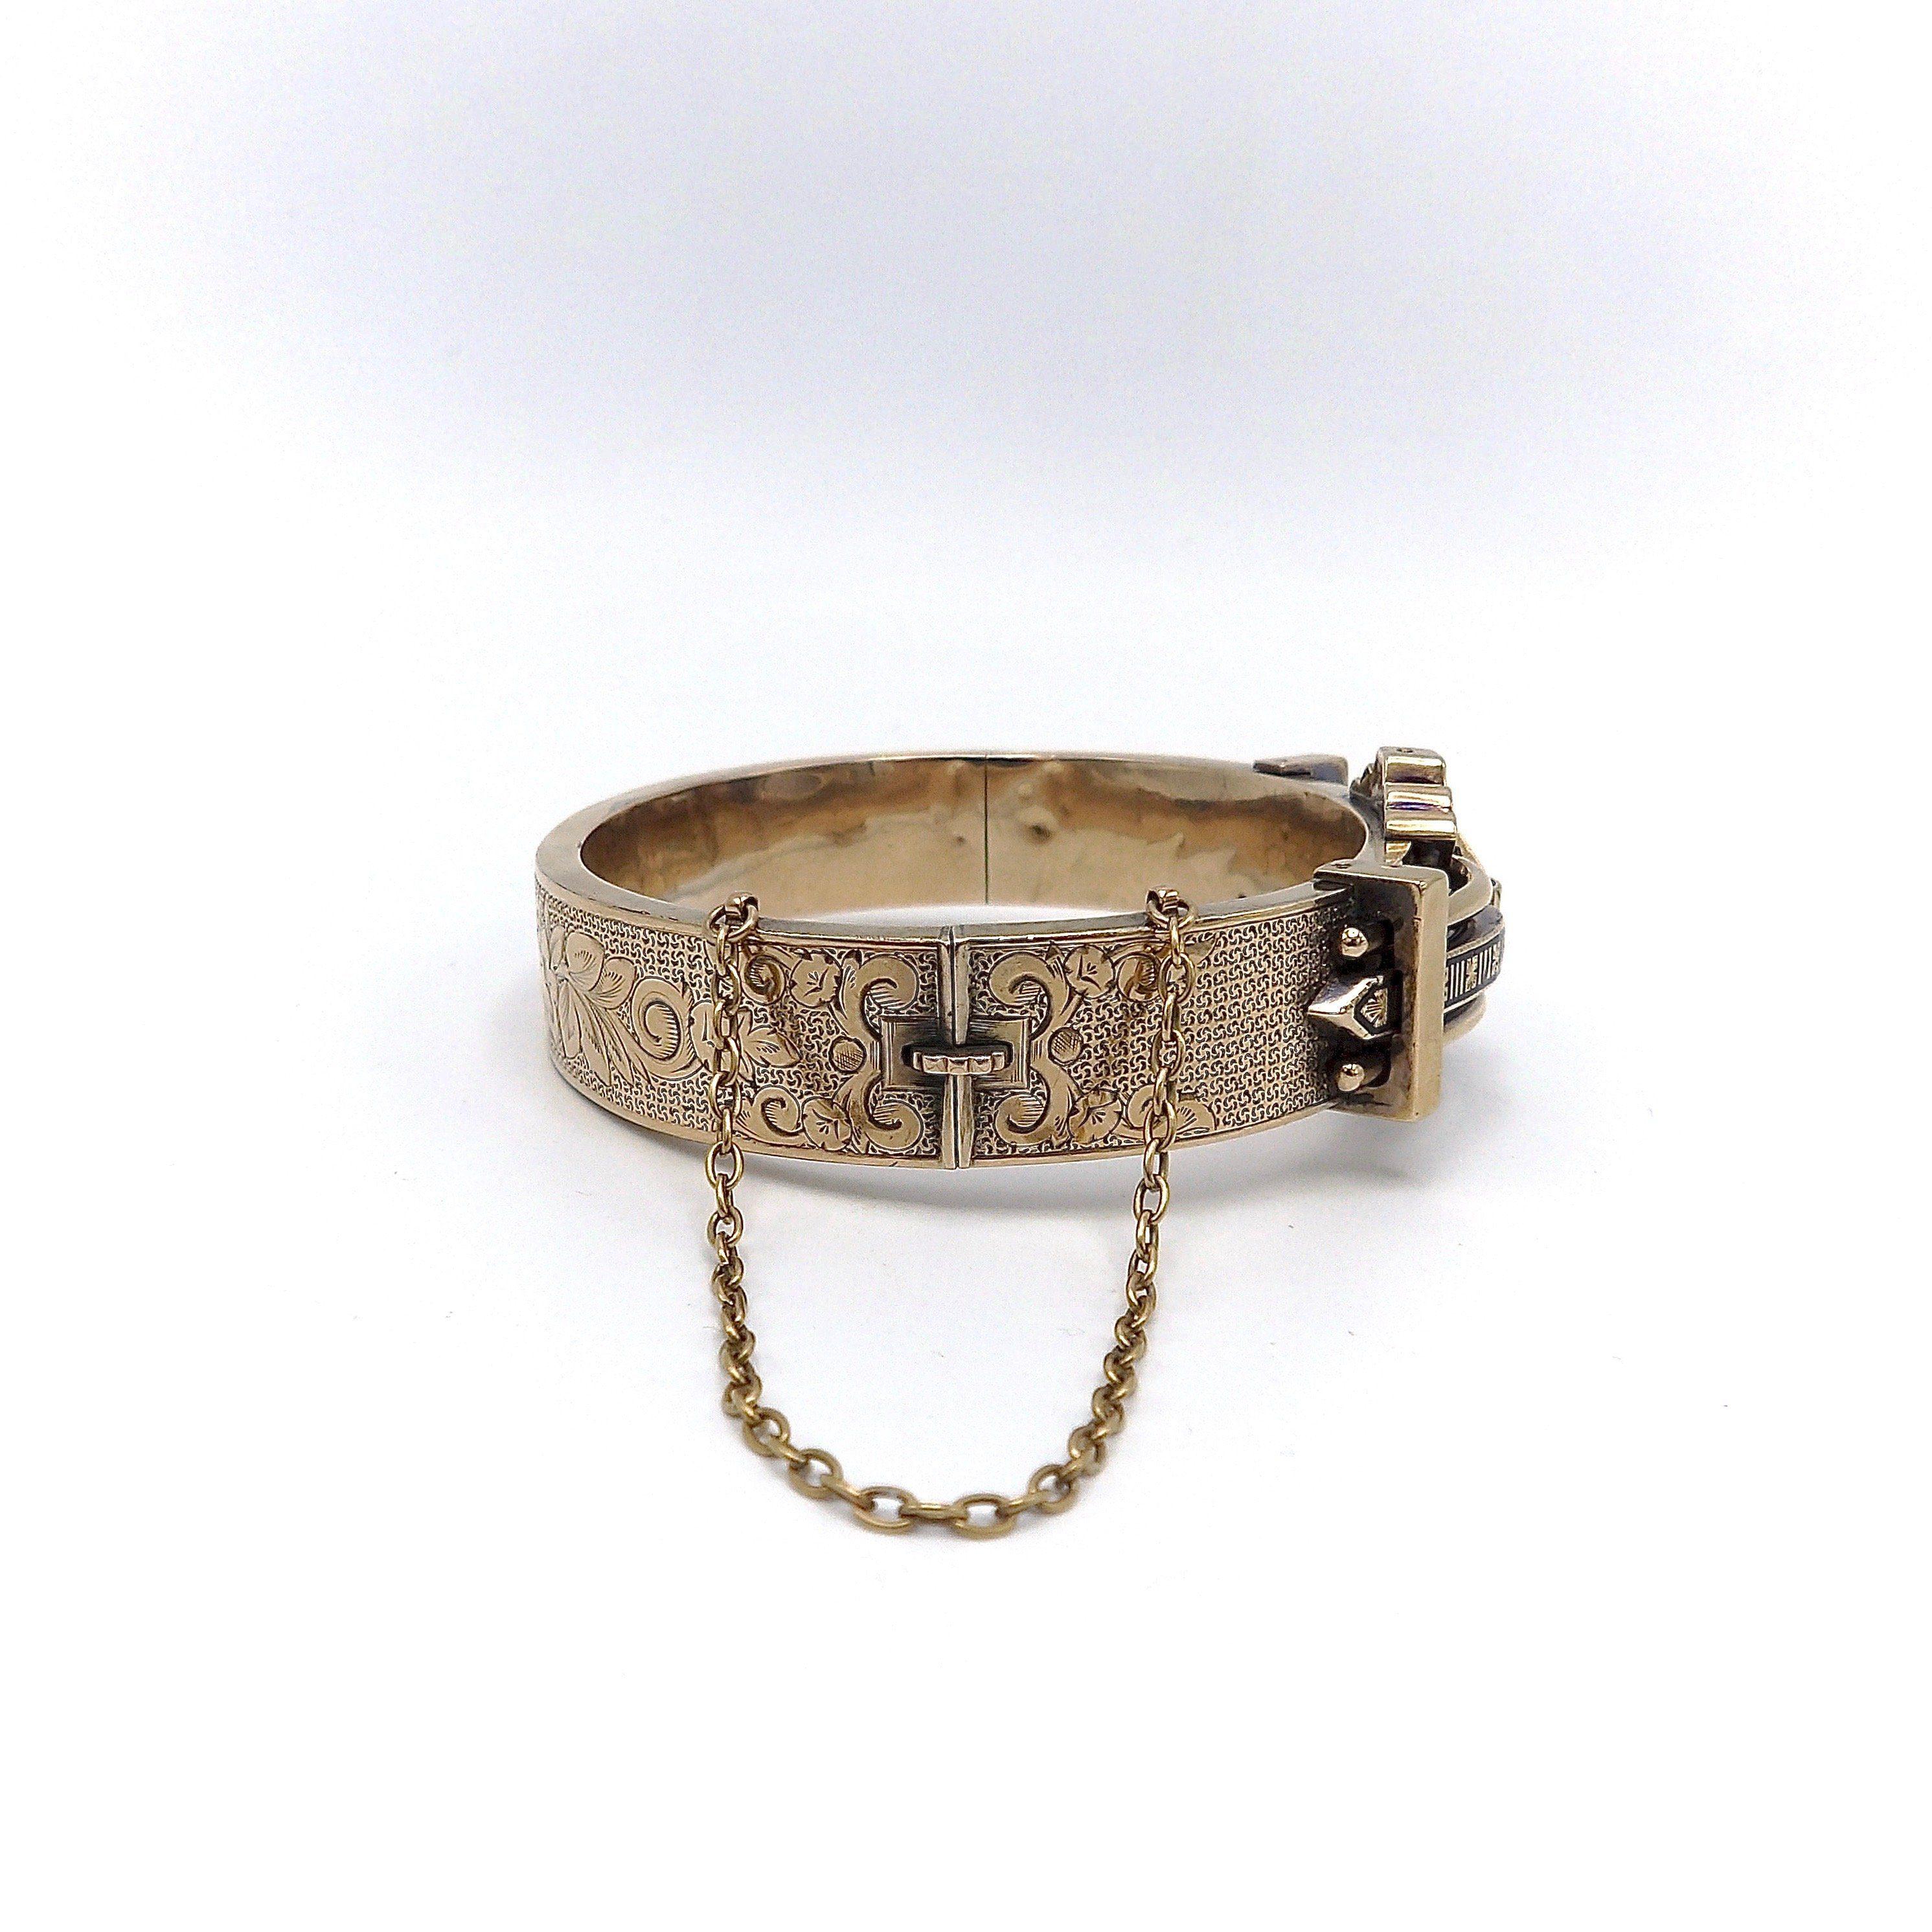 10K Rose Gold Victorian Architectural Revival Taille D’Epargne Bracelet In Good Condition For Sale In Venice, CA